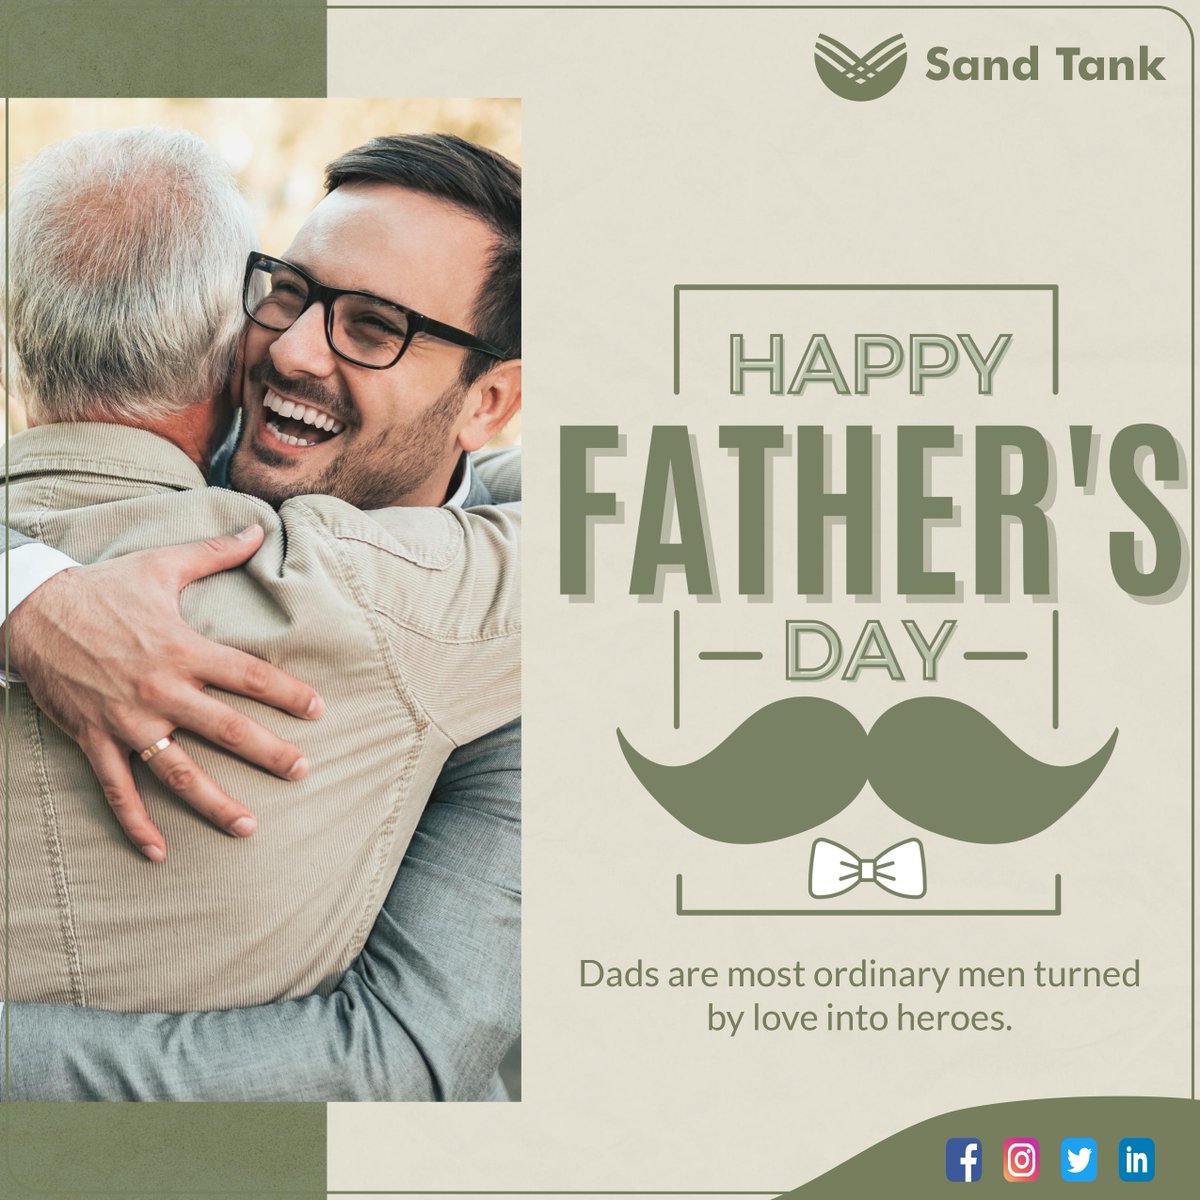 Wishing a very Happy Father's Day to the unsung heroes who work tirelessly to provide for their families, showering them with love and support. You are true champions. 

#Sandtankfoundation #fatherday #Happyfathersday #fatherdaughterlove #bestdad #fathersday #fathersdaylove